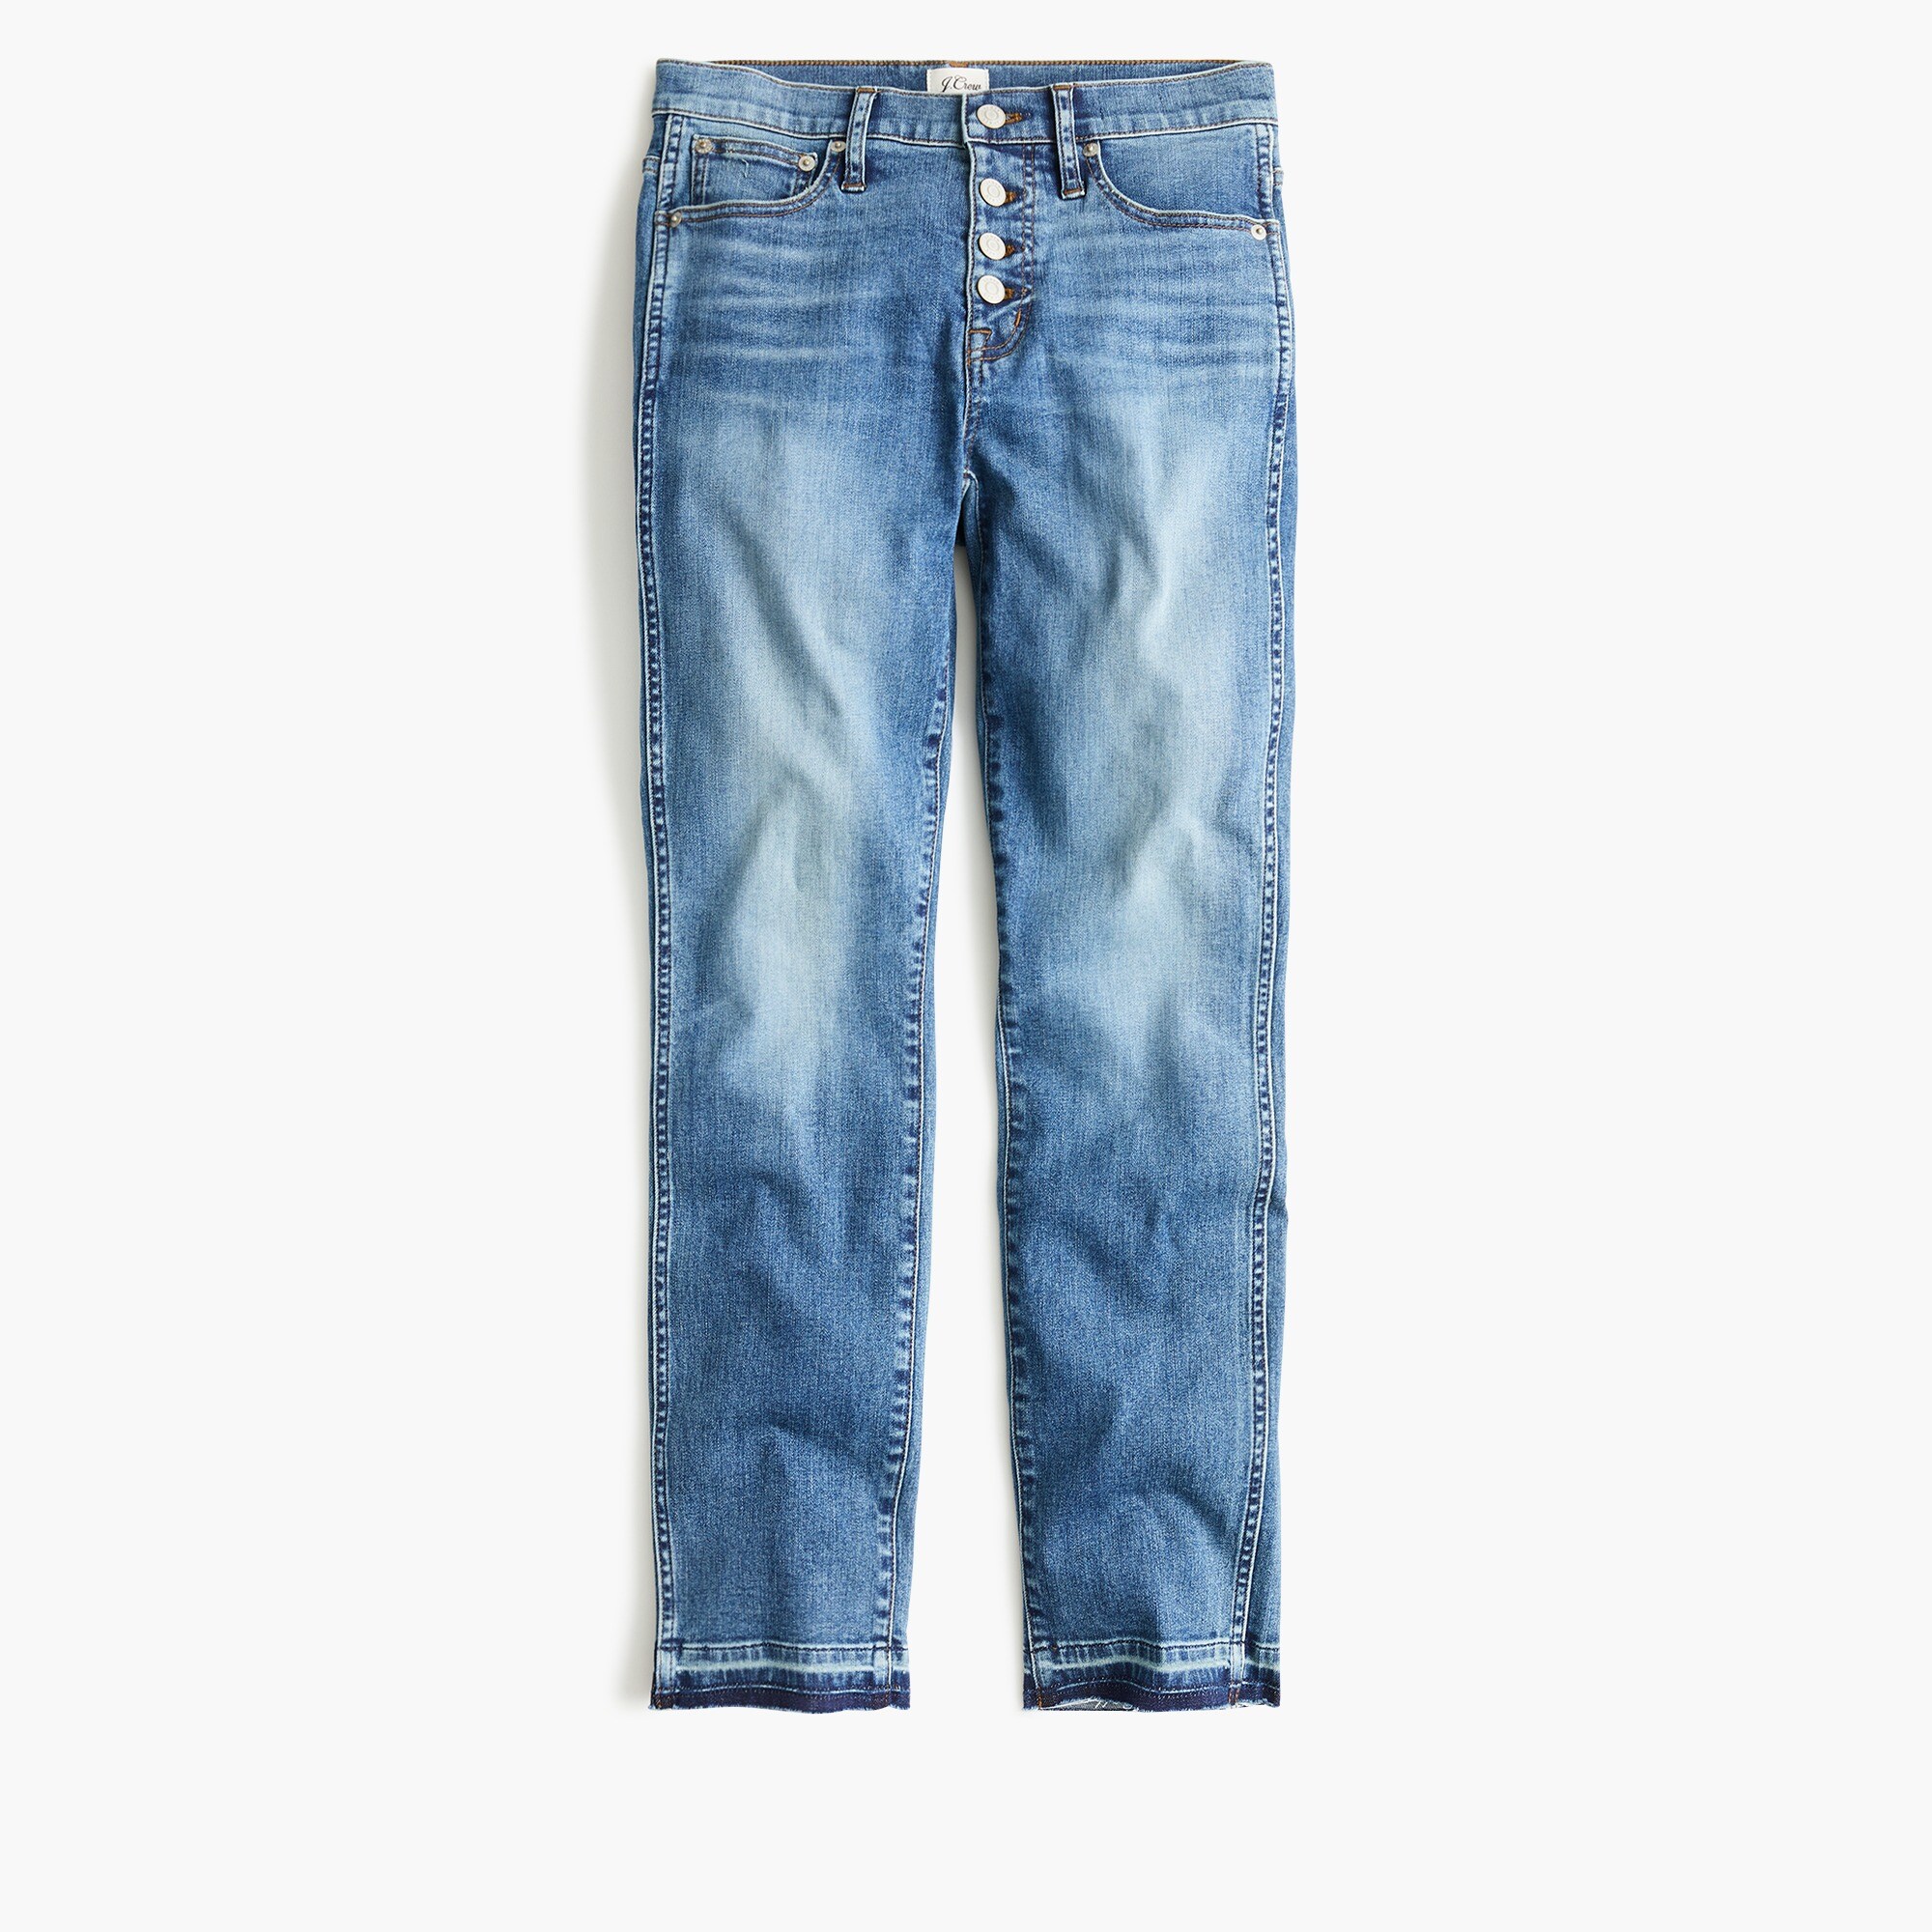 J.Crew: Vintage Straight Eco Jean In Sparkling Sea Wash For Women